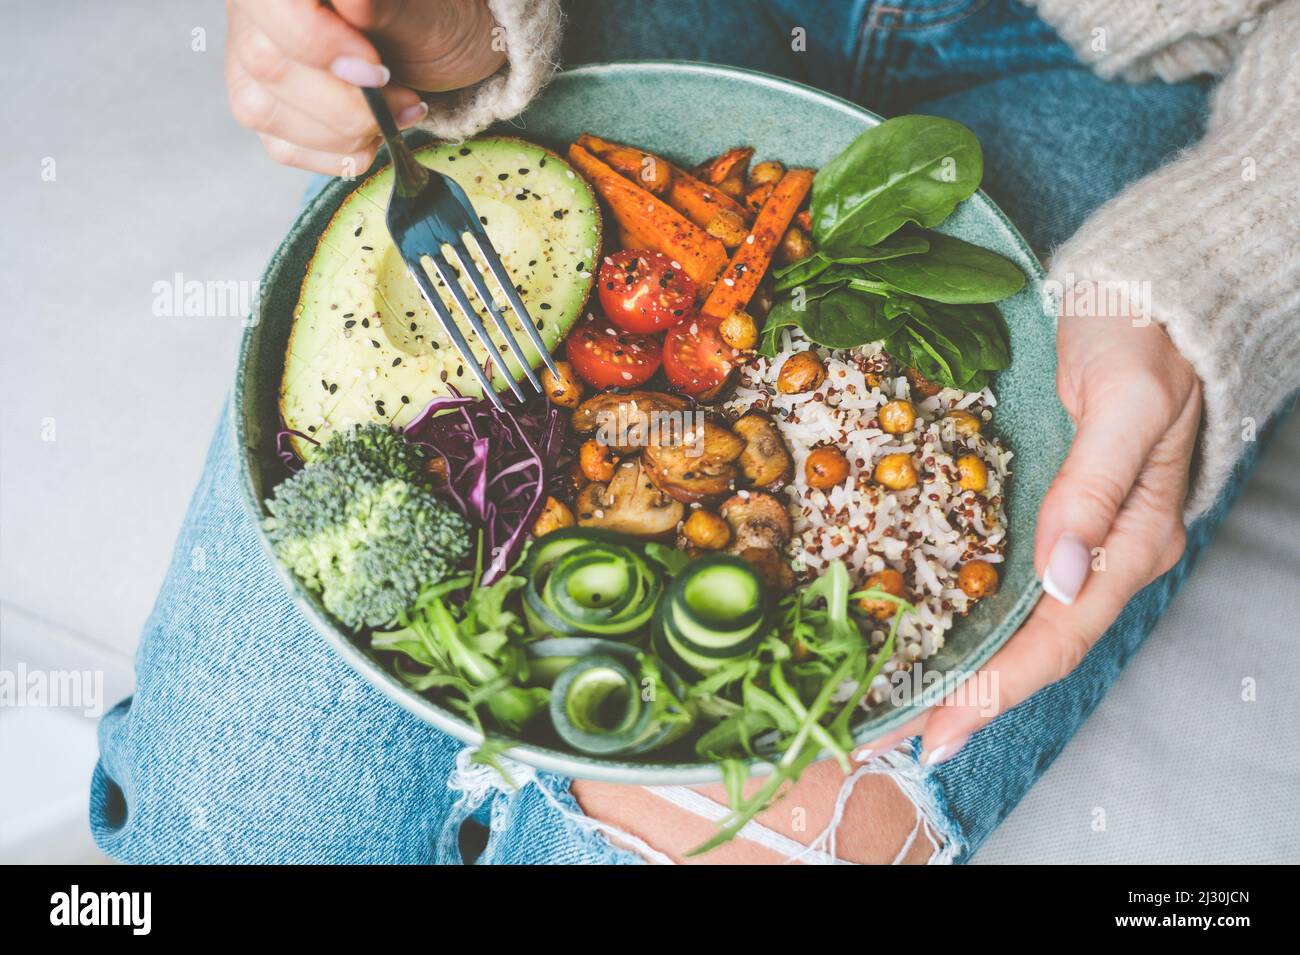 Woman eating healthy meal. Bowl with rice, quinoa, avocado, cucumber, broccoli and cucumber. Healthy diet, lunch or dinner. Healthy food plate Stock Photo